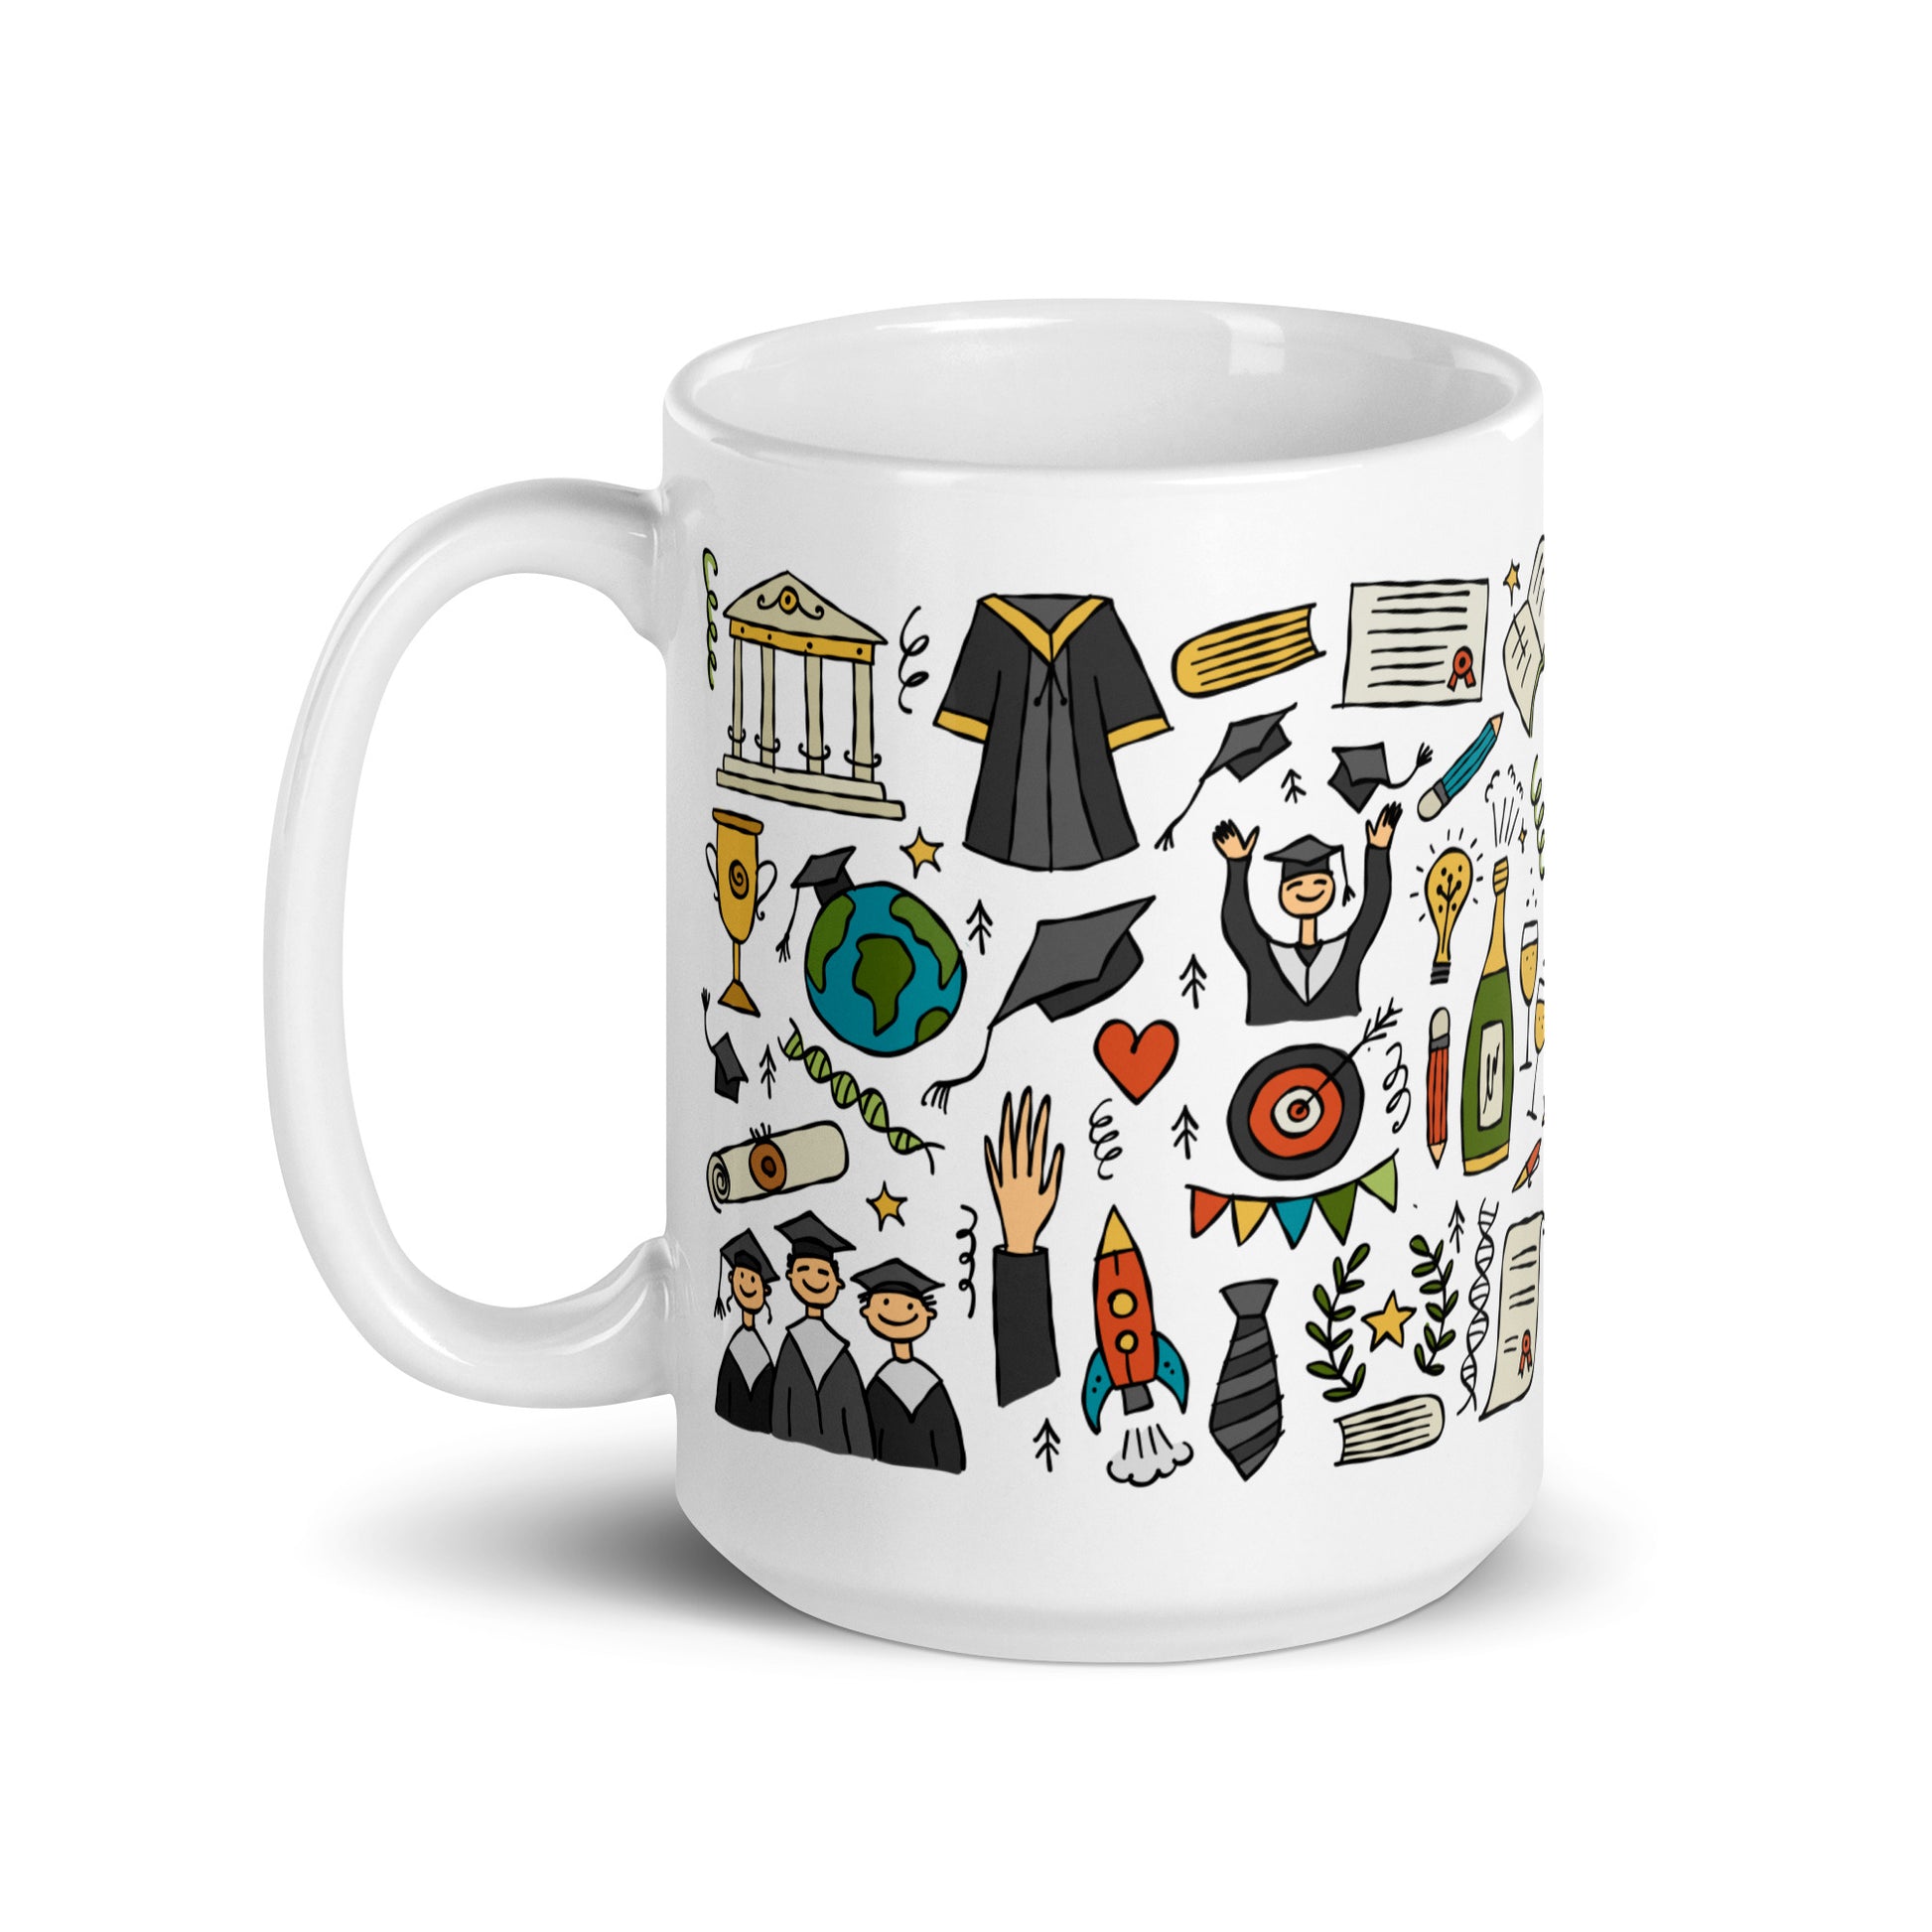 Personalised 2023 graduation mug 15oz with funny designer print featuring graduates in hats and mantles, school books and holiday motifs and graduation teddy bear